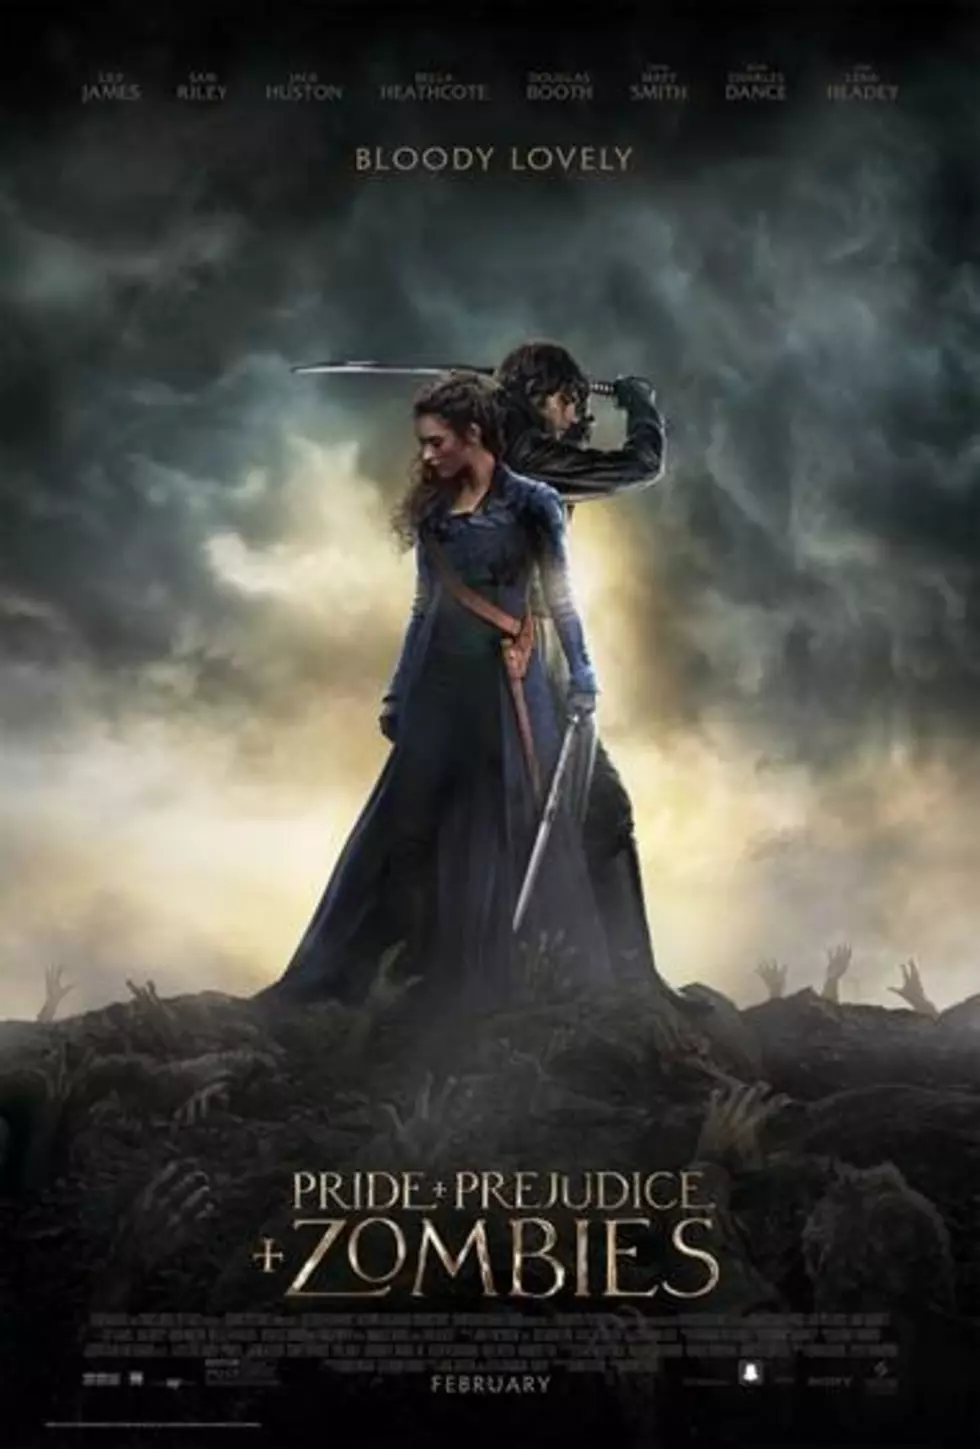 Get Access to a Special Pre-Screening of &#8216;Pride, Prejudice, and Zombies&#8217;